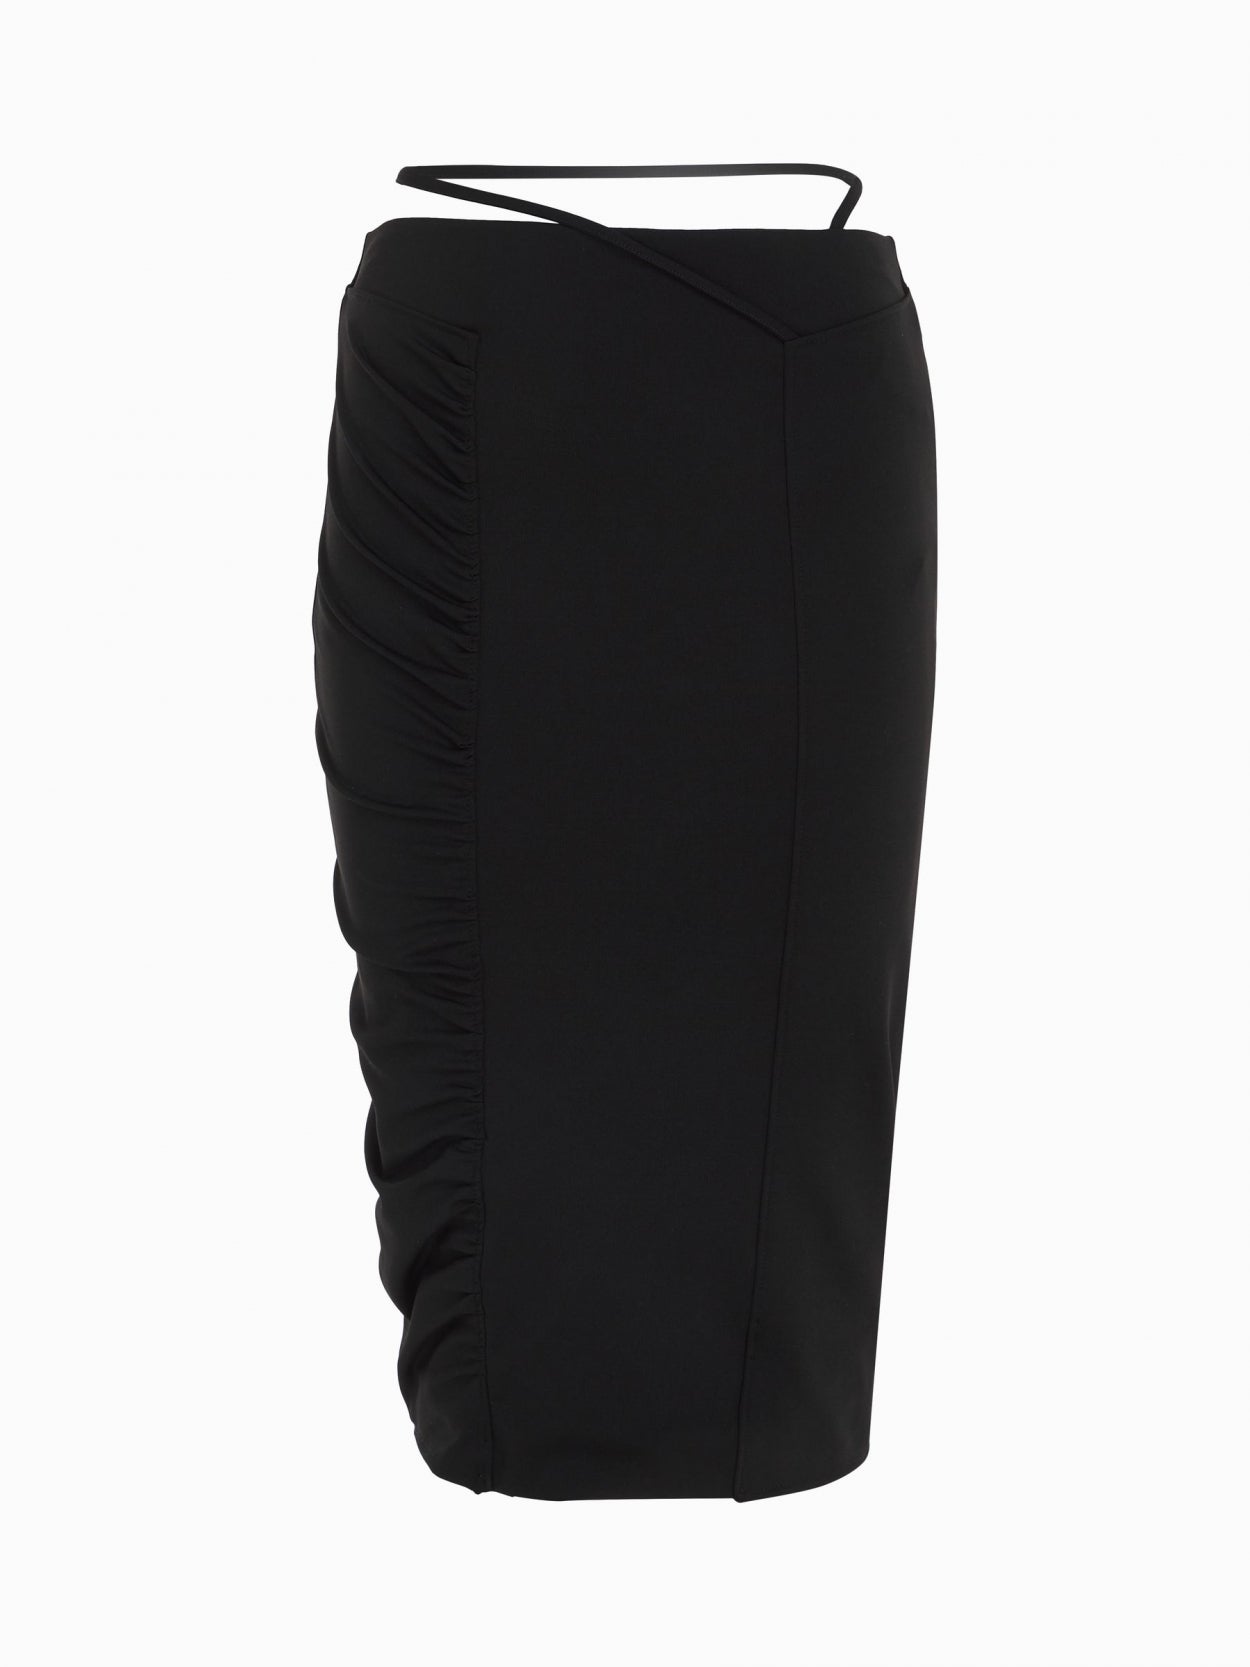 front packshot of a black midi pencil skirt with waist strap